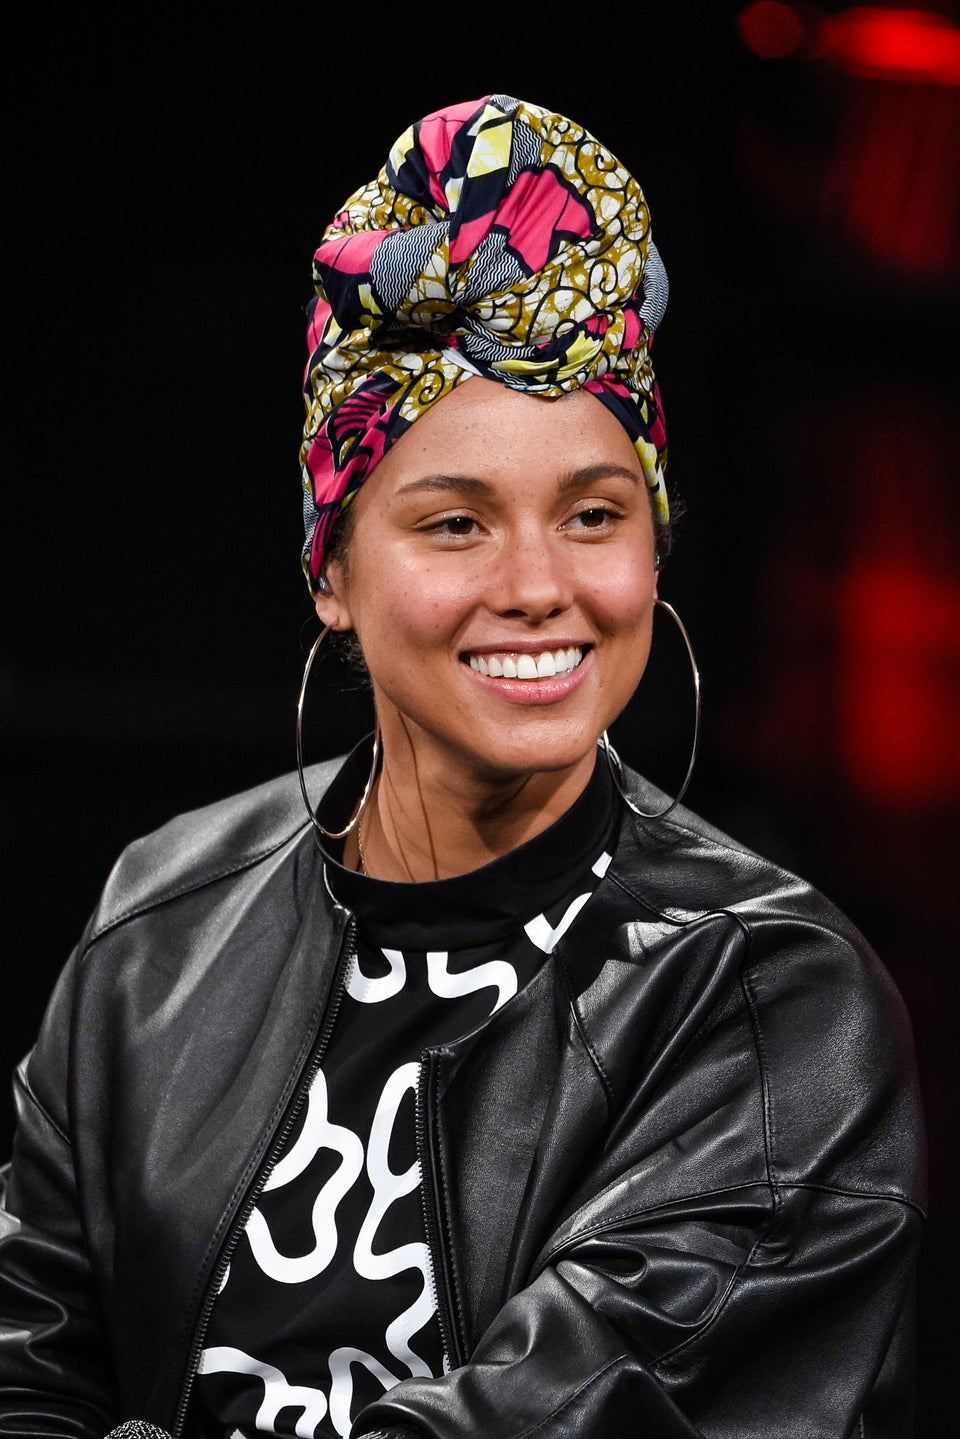 How Meditating Is Helping Alicia Keys Be a More Mindful Mom: ‘It’s Given Me a Whole New Perspective’